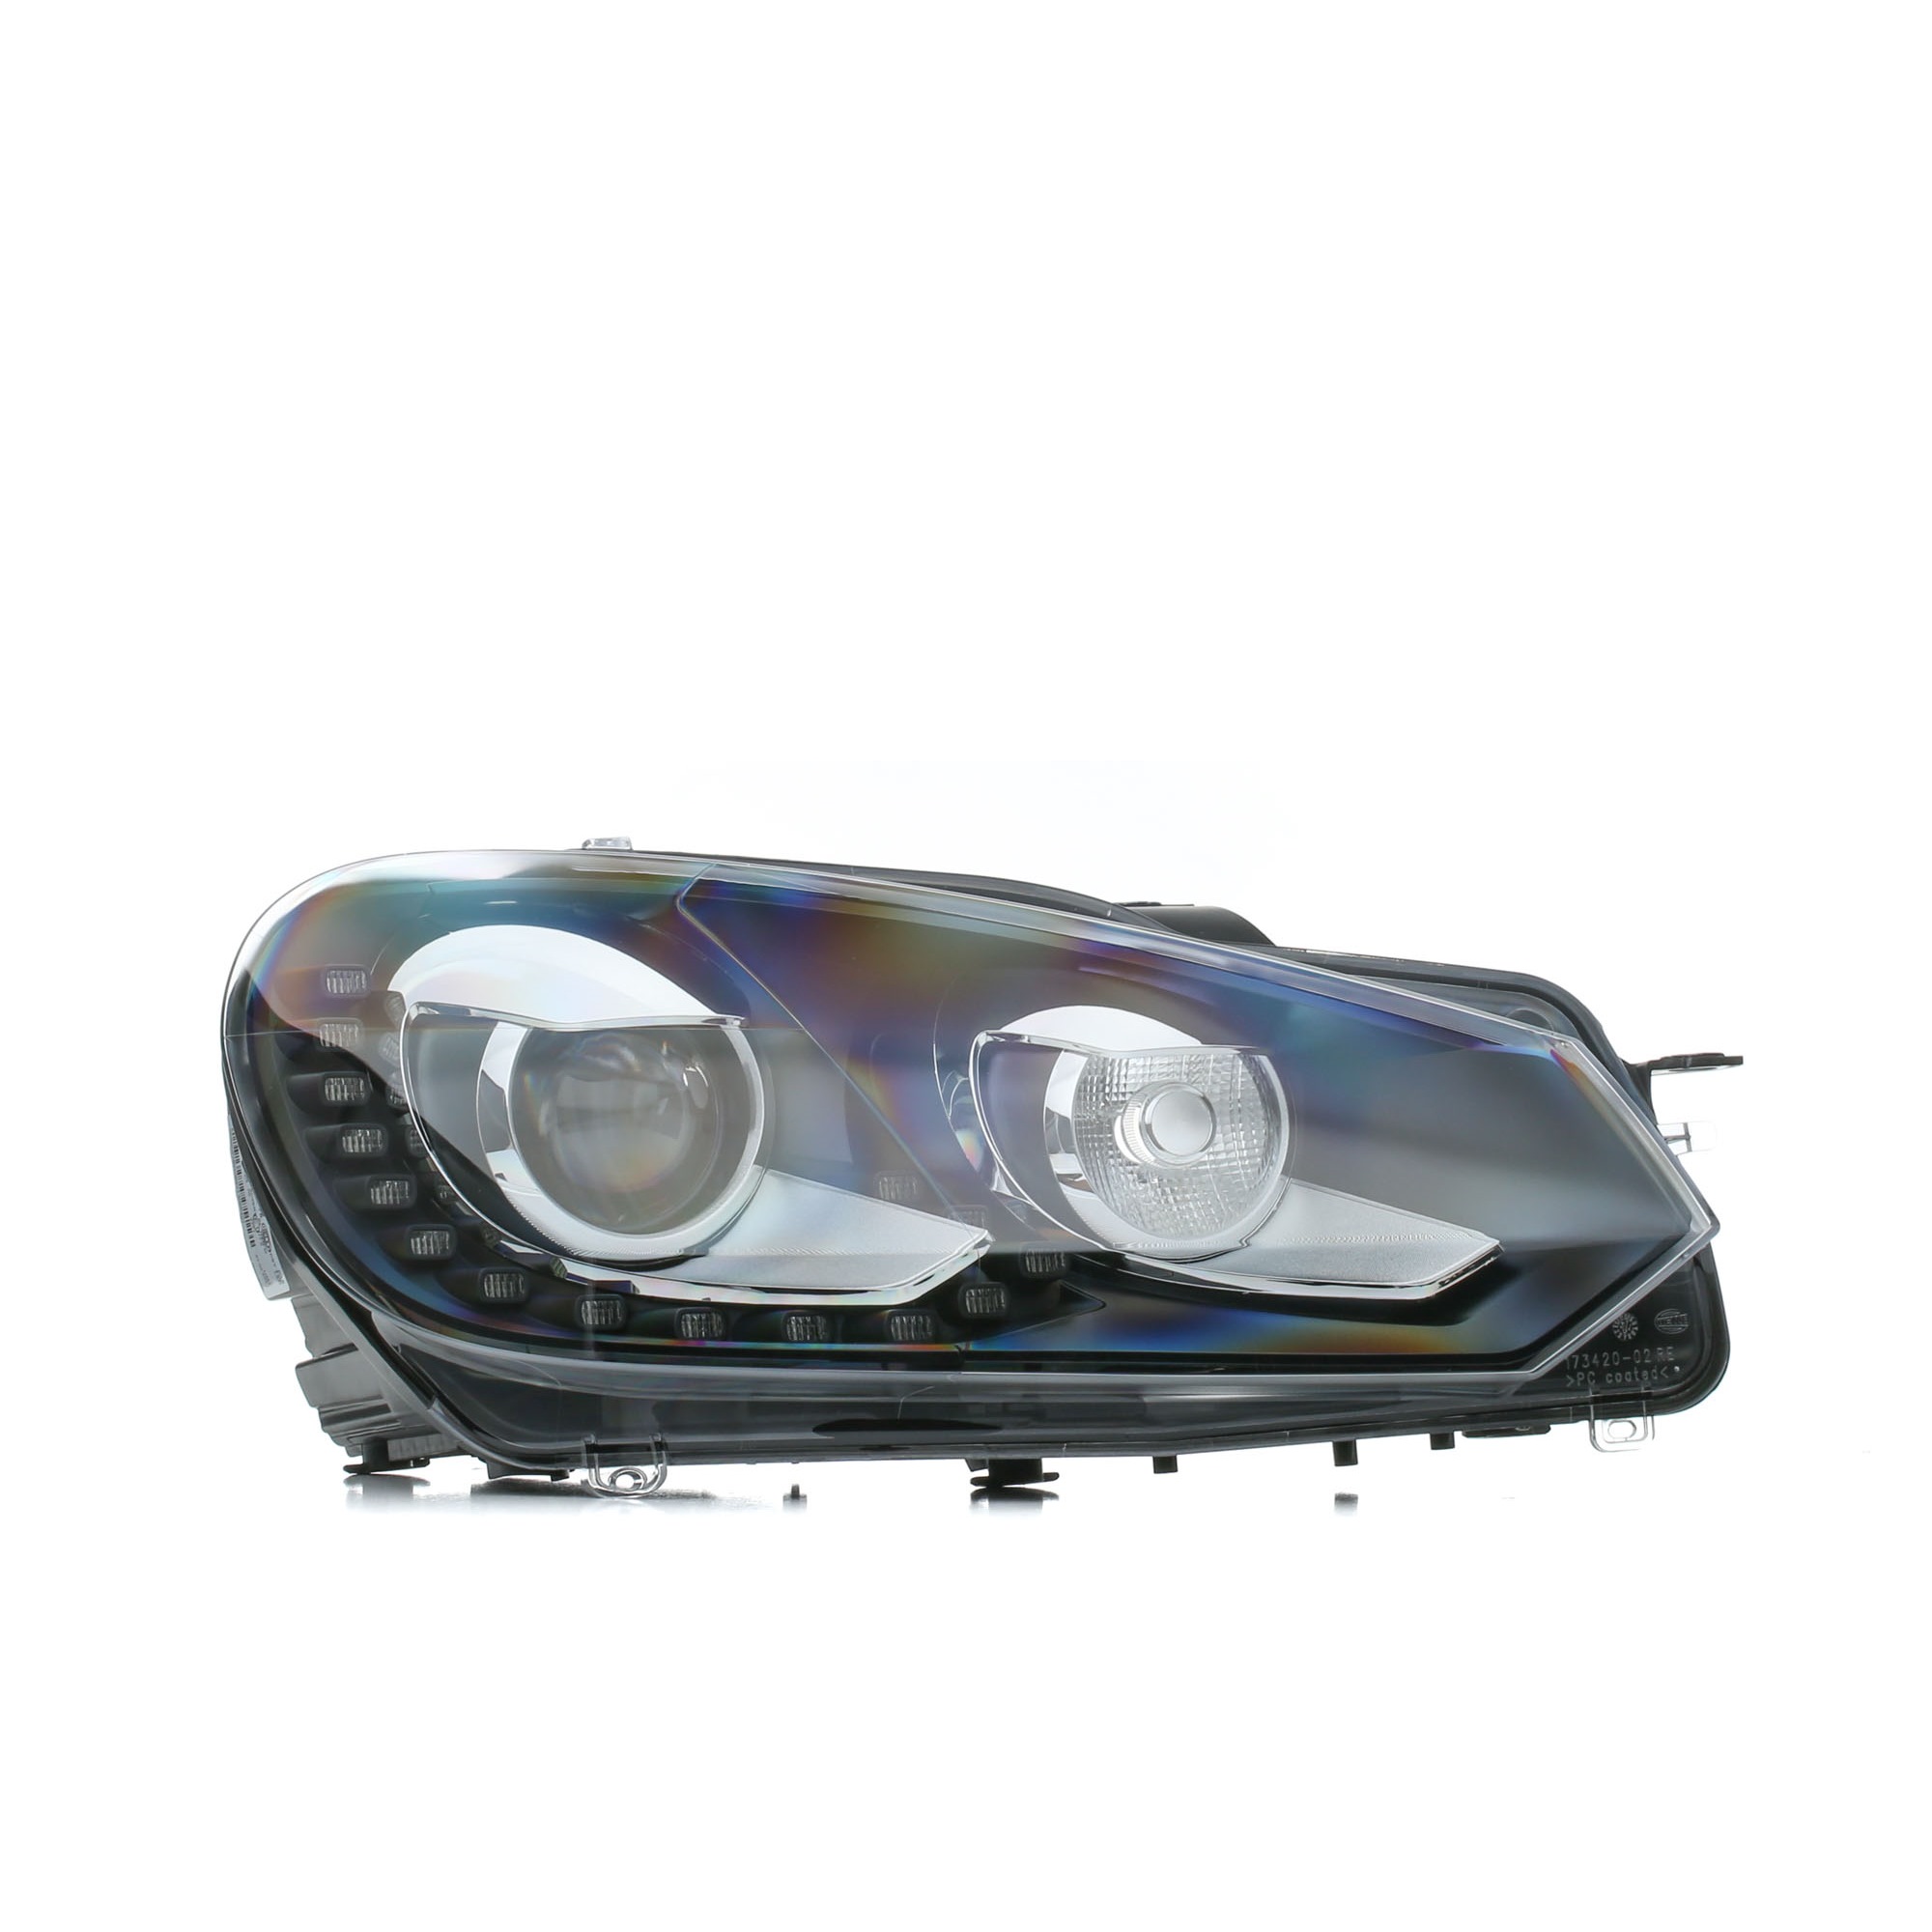 E1 2771 HELLA Right, W5W, D1S, LED, PY21W, Bi-Xenon, LED, 12V, chrome/black, with indicator, with position light, with low beam, with daytime running light (LED), with dynamic bending light, with high beam, for right-hand traffic, without control unit for dynamic bending light (AFS), with bulb, without glow discharge lamp, with motor for headlamp levelling, without ballast Left-hand/Right-hand Traffic: for right-hand traffic, Vehicle Equipment: for vehicles with dynamic bending light Front lights 1ZS 009 902-781 buy